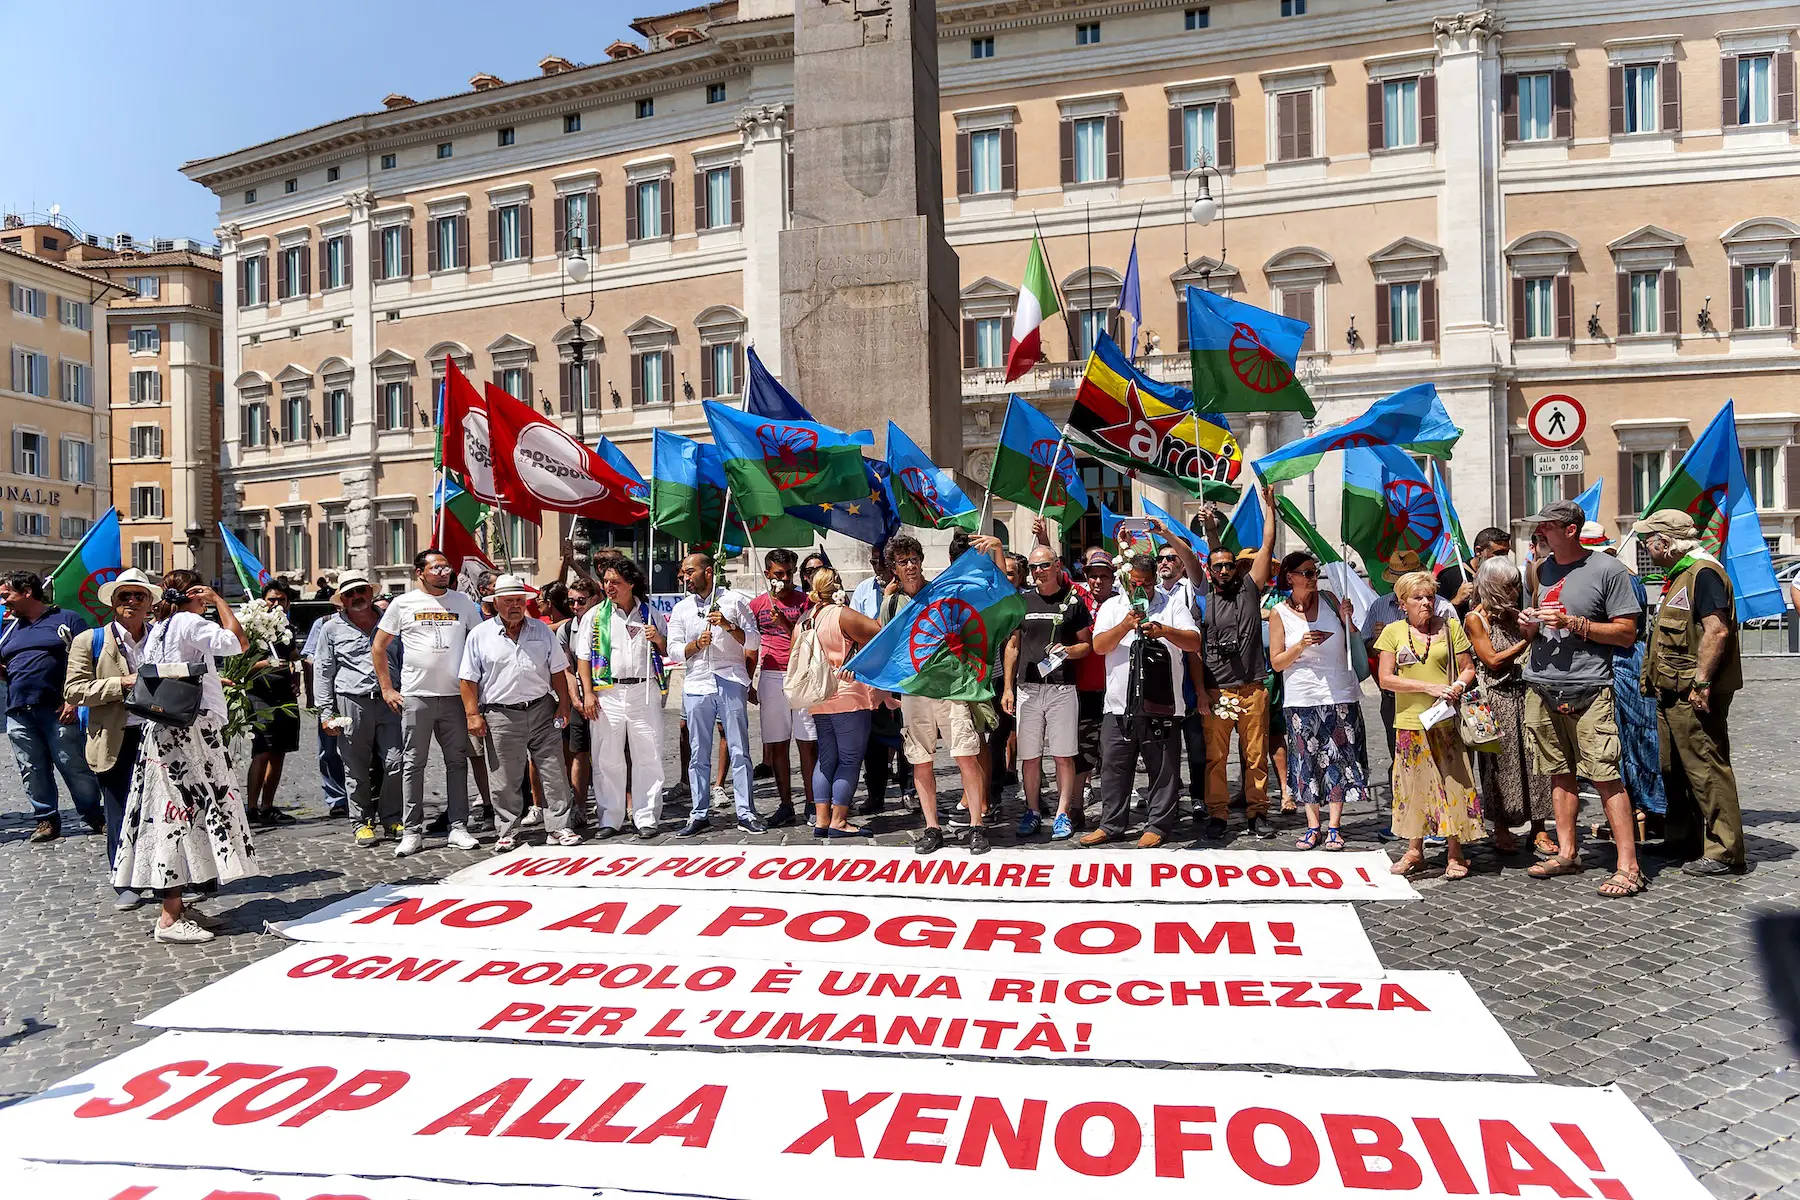 A large gathering of Romani people and supporters fly the Romani flag and display signs on the ground protesting xenophobia